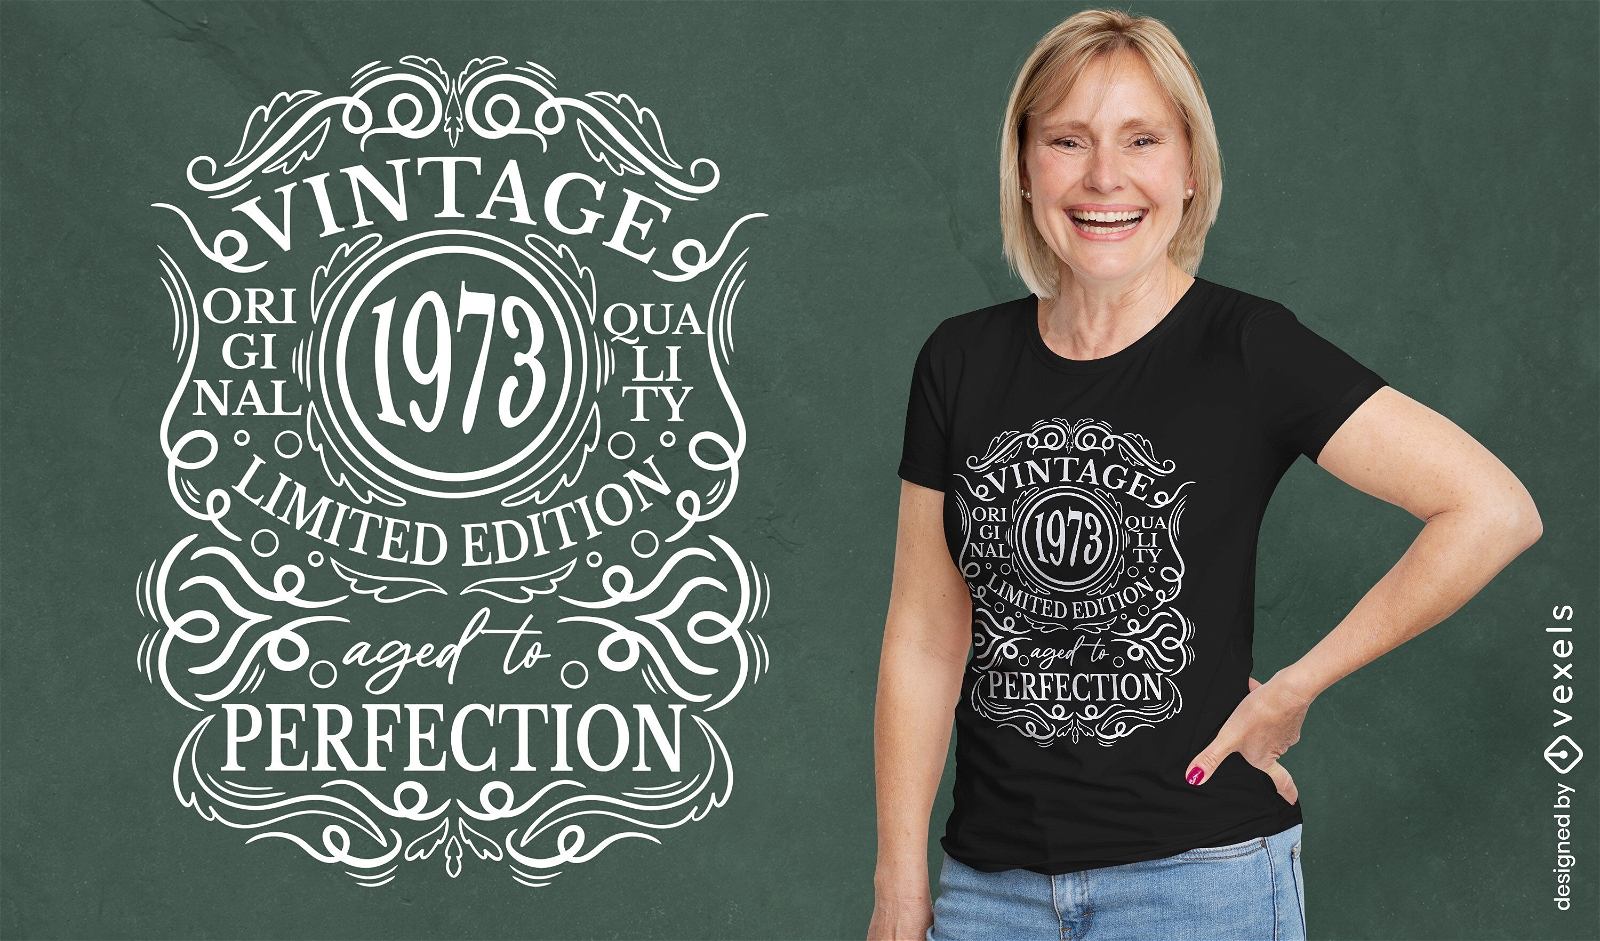 Vintage limited edition quote t-shirt design